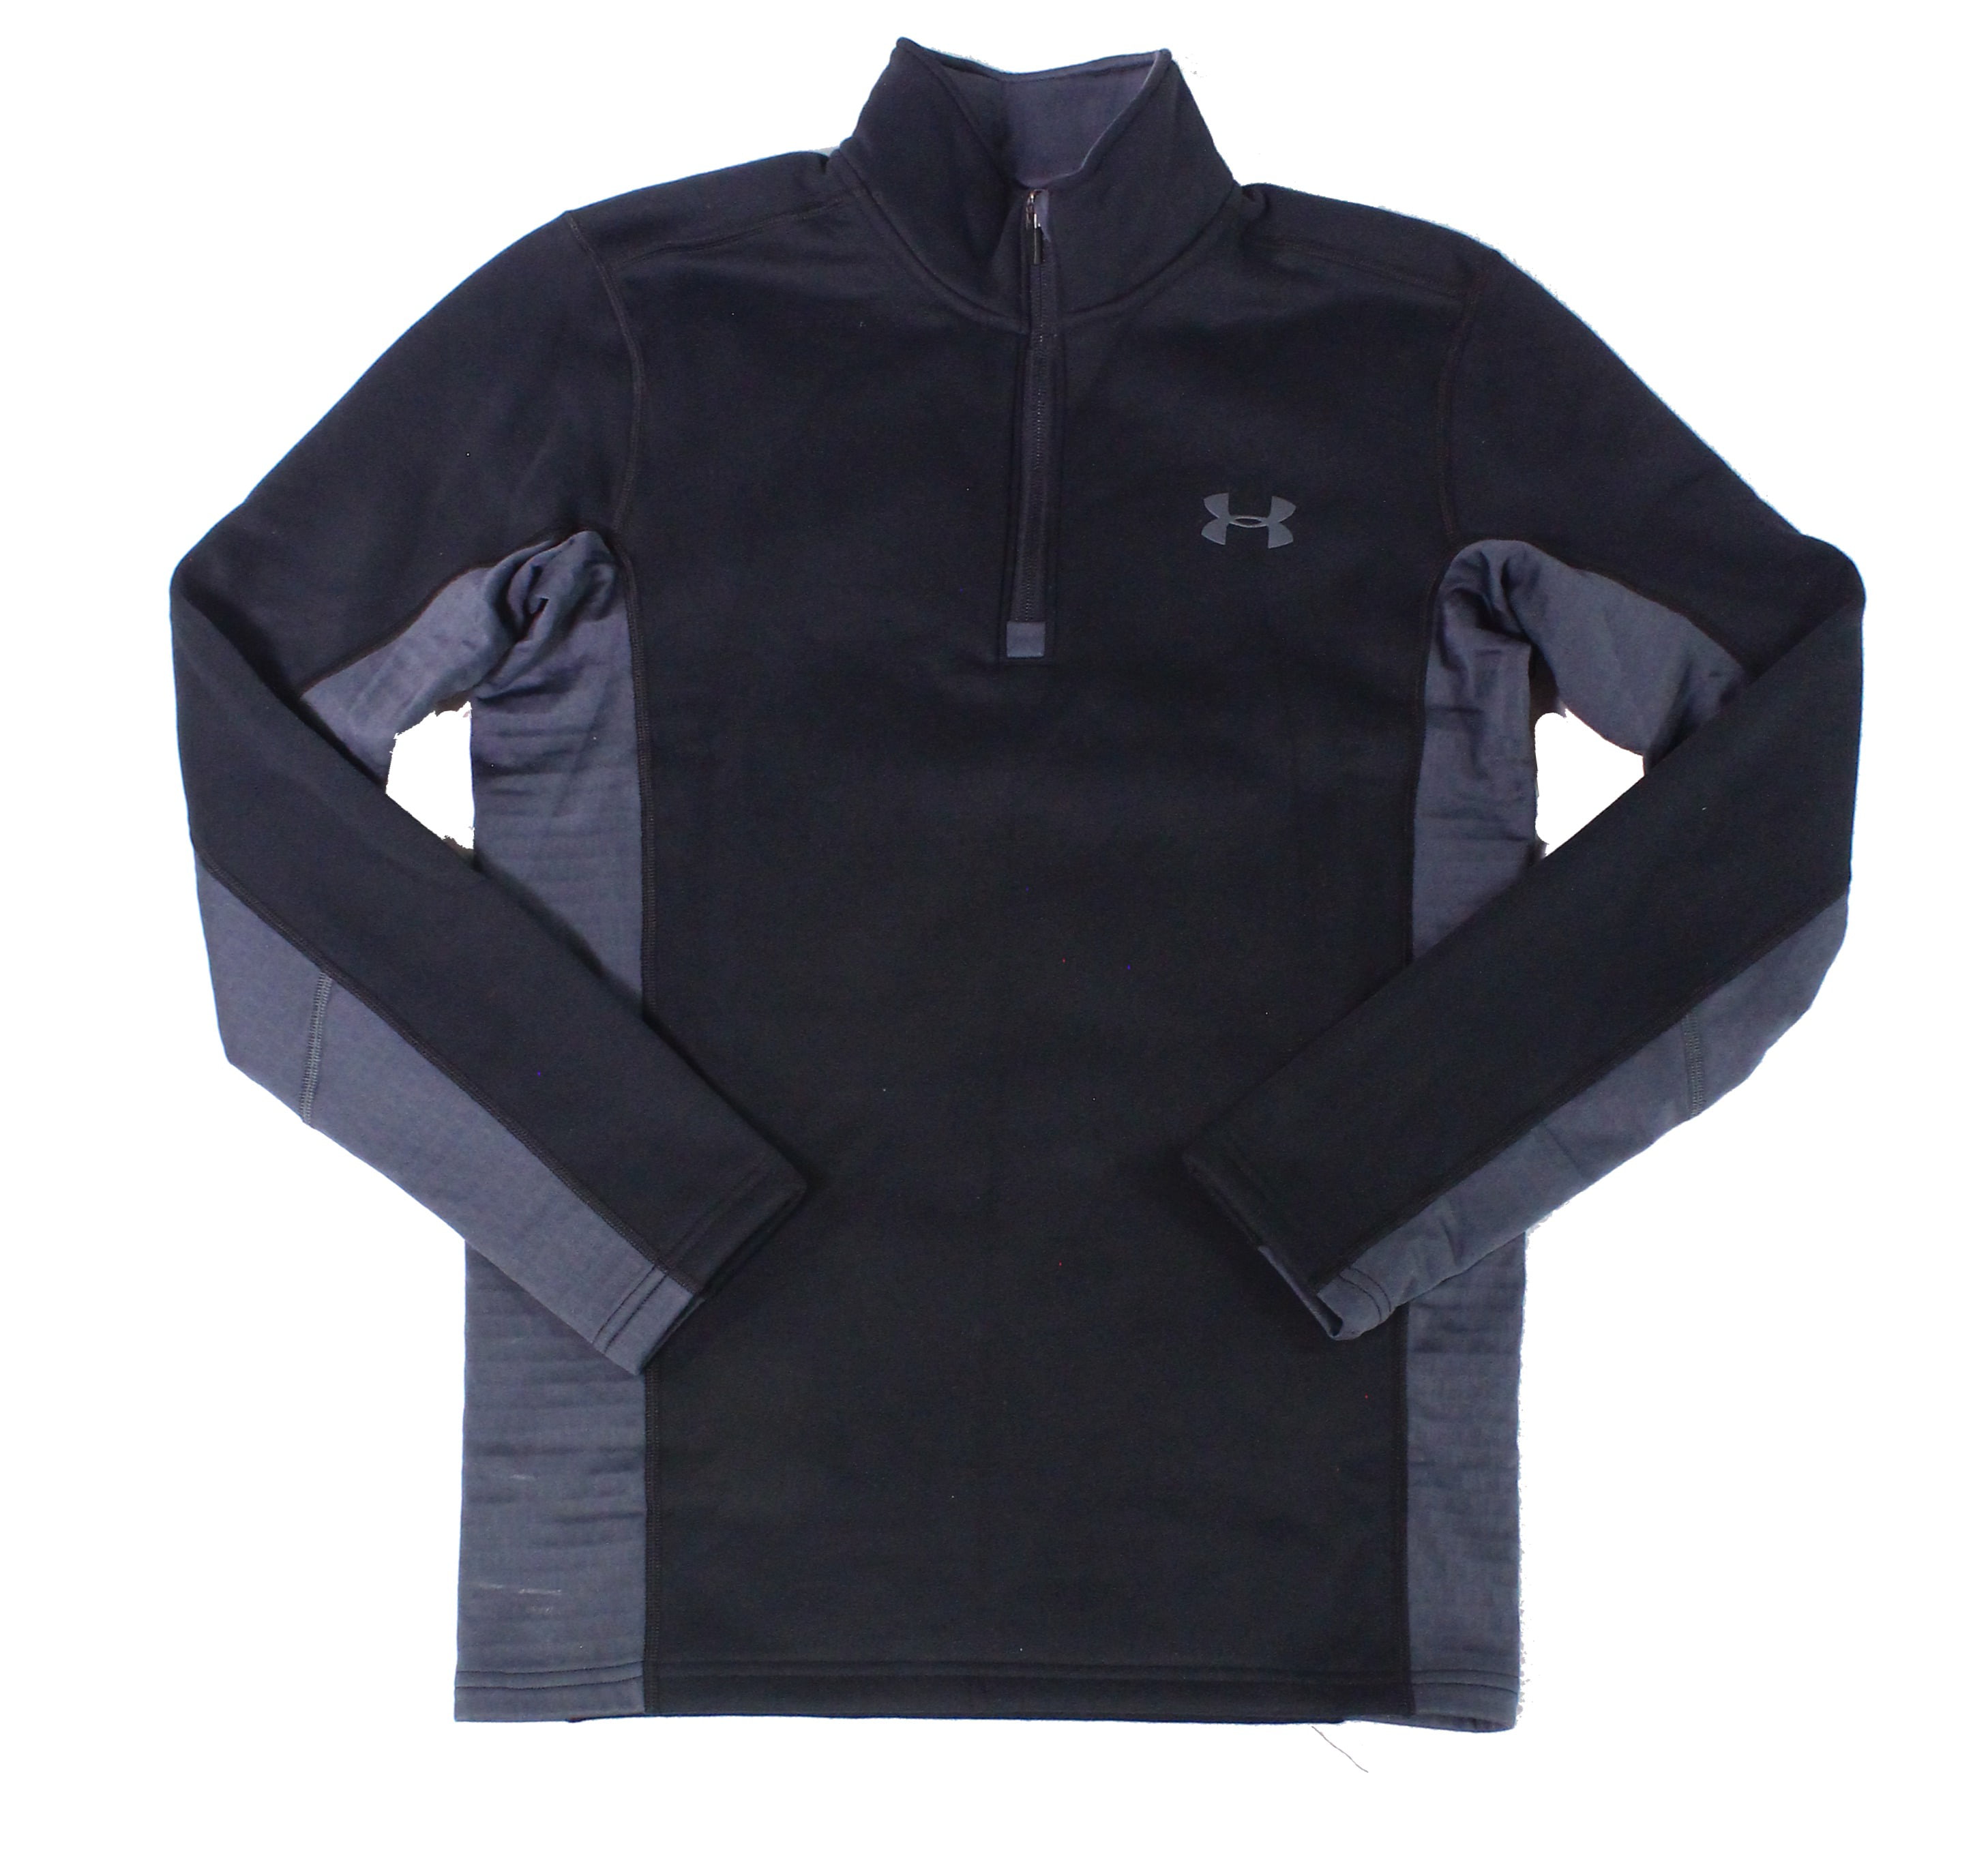 Under Armour - Mens Sweater Small 1/2 Zip Coldgear Pullover S - Walmart ...